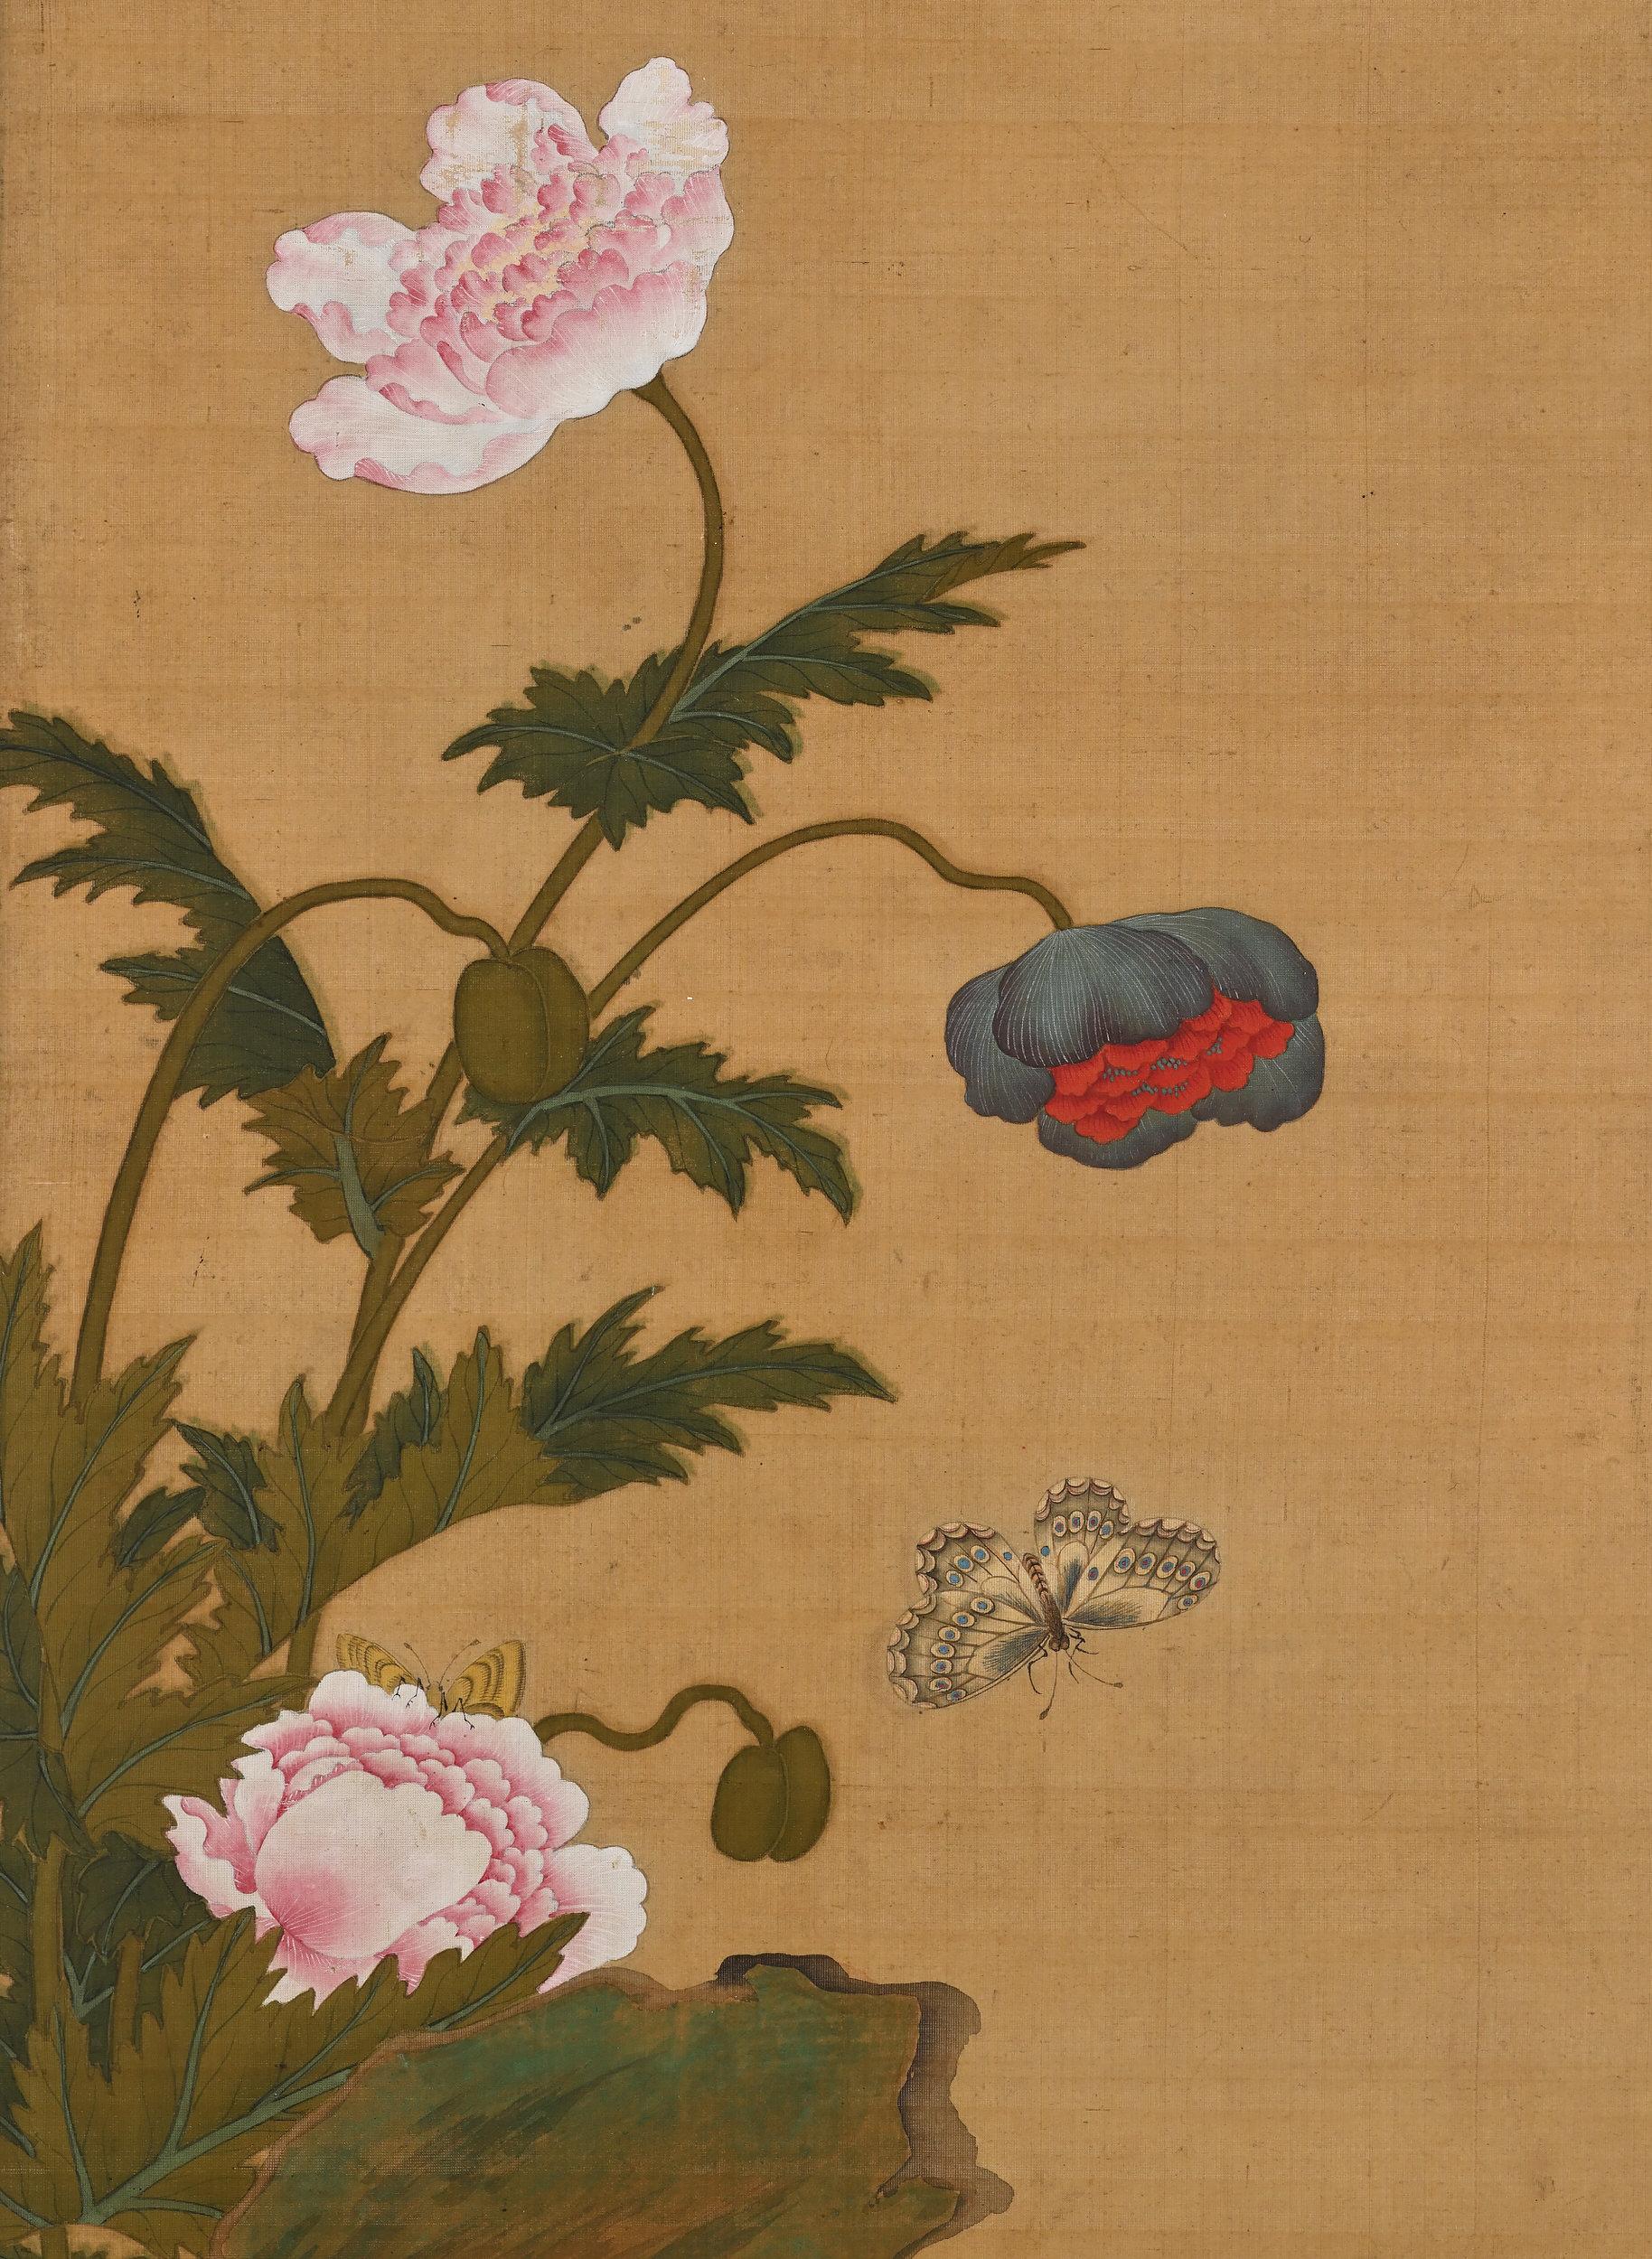 Edo 19th Century Japanese Scroll Painting by Igarashi Chikusa, Poppies & Butterflies For Sale